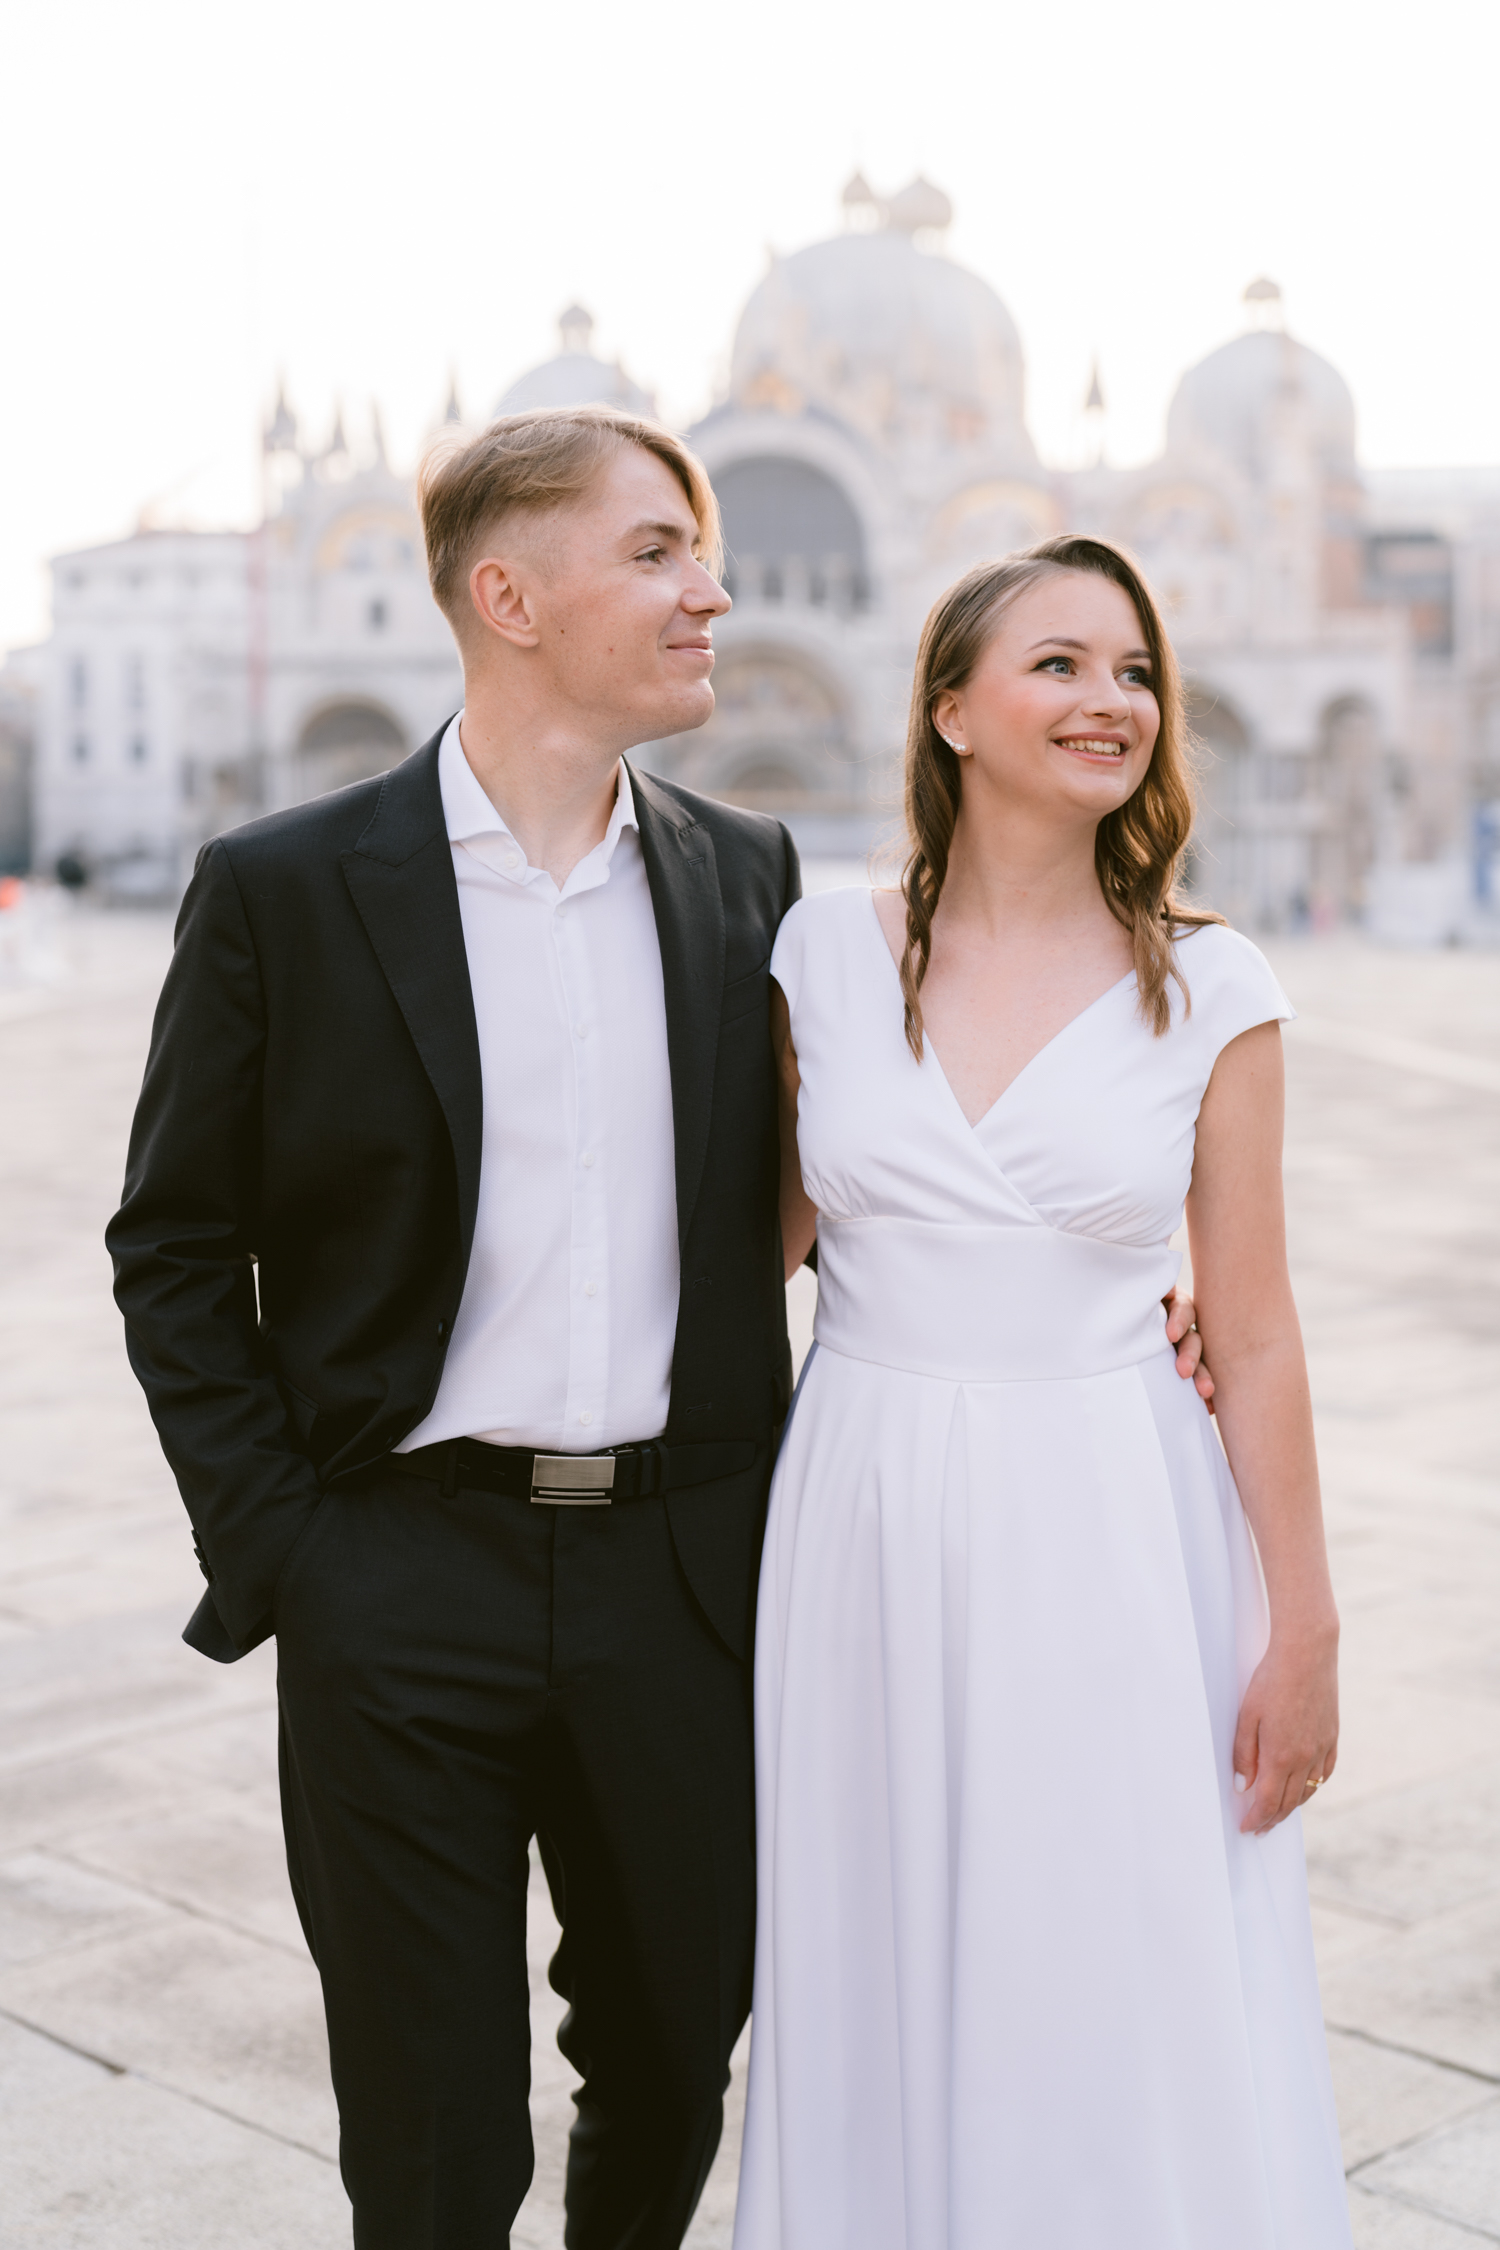 Capture your love story in the stunning backdrop of Venice with our professional wedding and elopement photography services. Book an unforgettable photoshoot and create timeless memories against the romantic canals, historic landmarks, and charming streets of this enchanting city. Let us document your special day in Venice with passion, creativity, and a touch of magic.